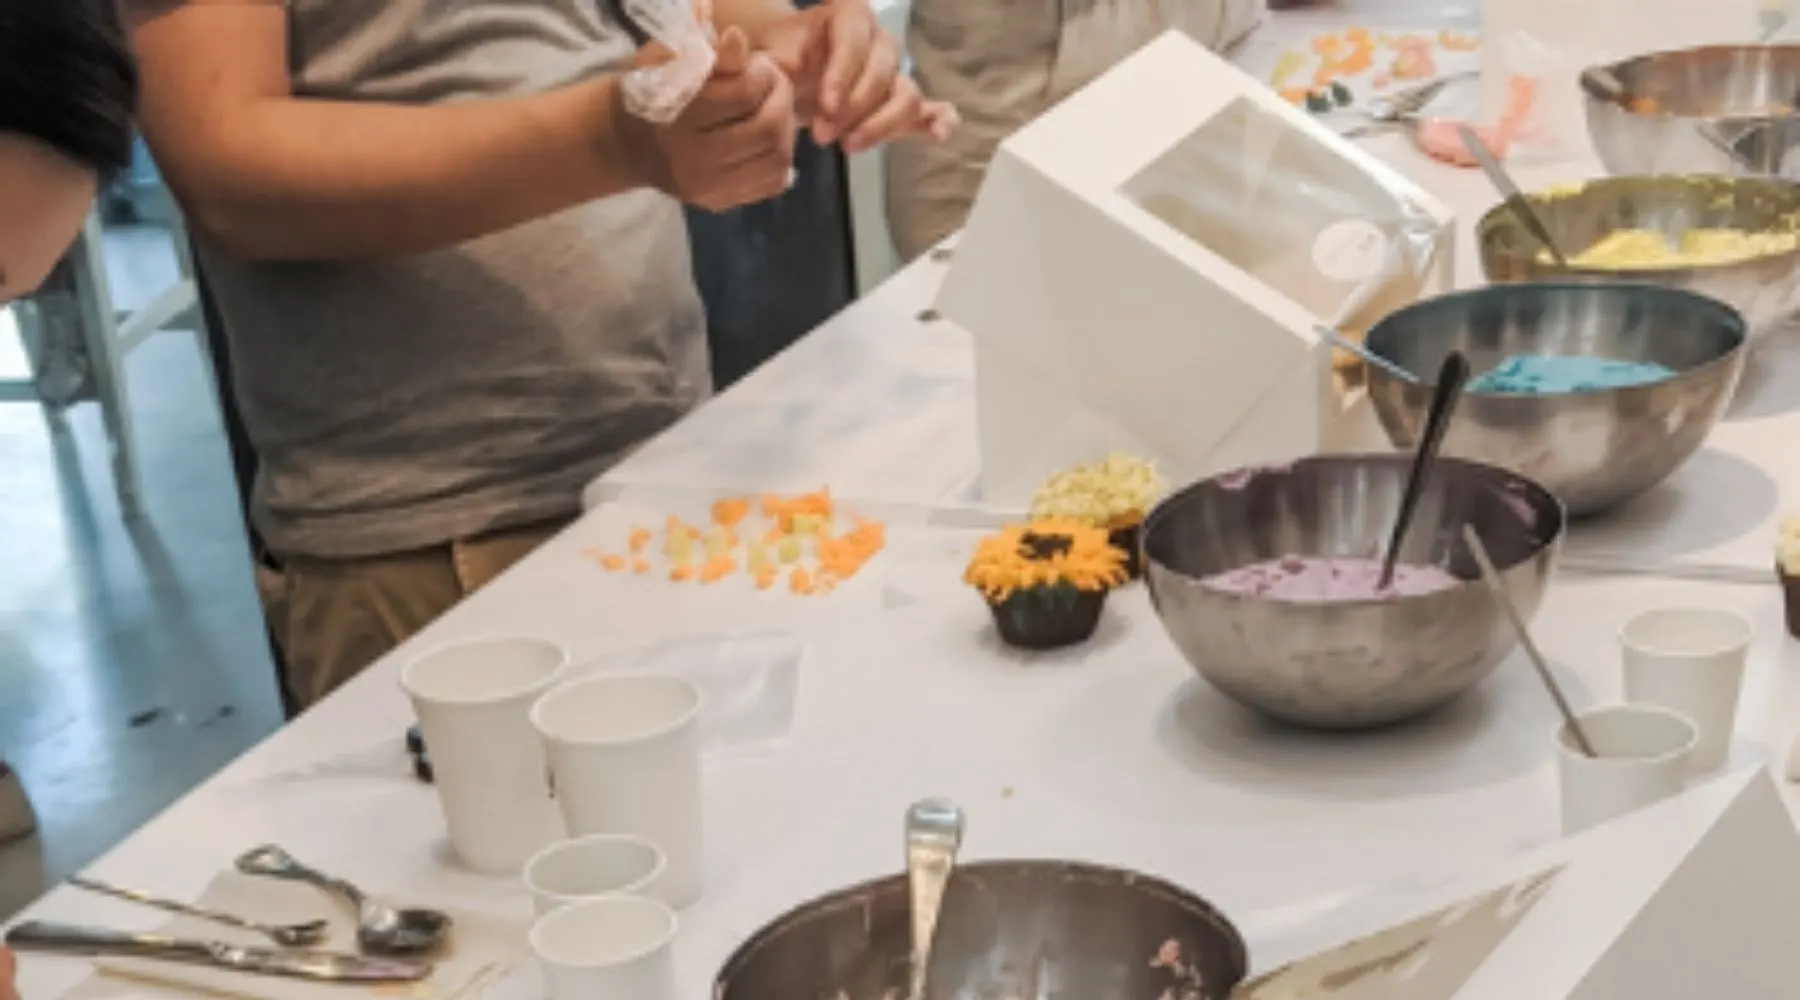 People take part in a cupcake making class.